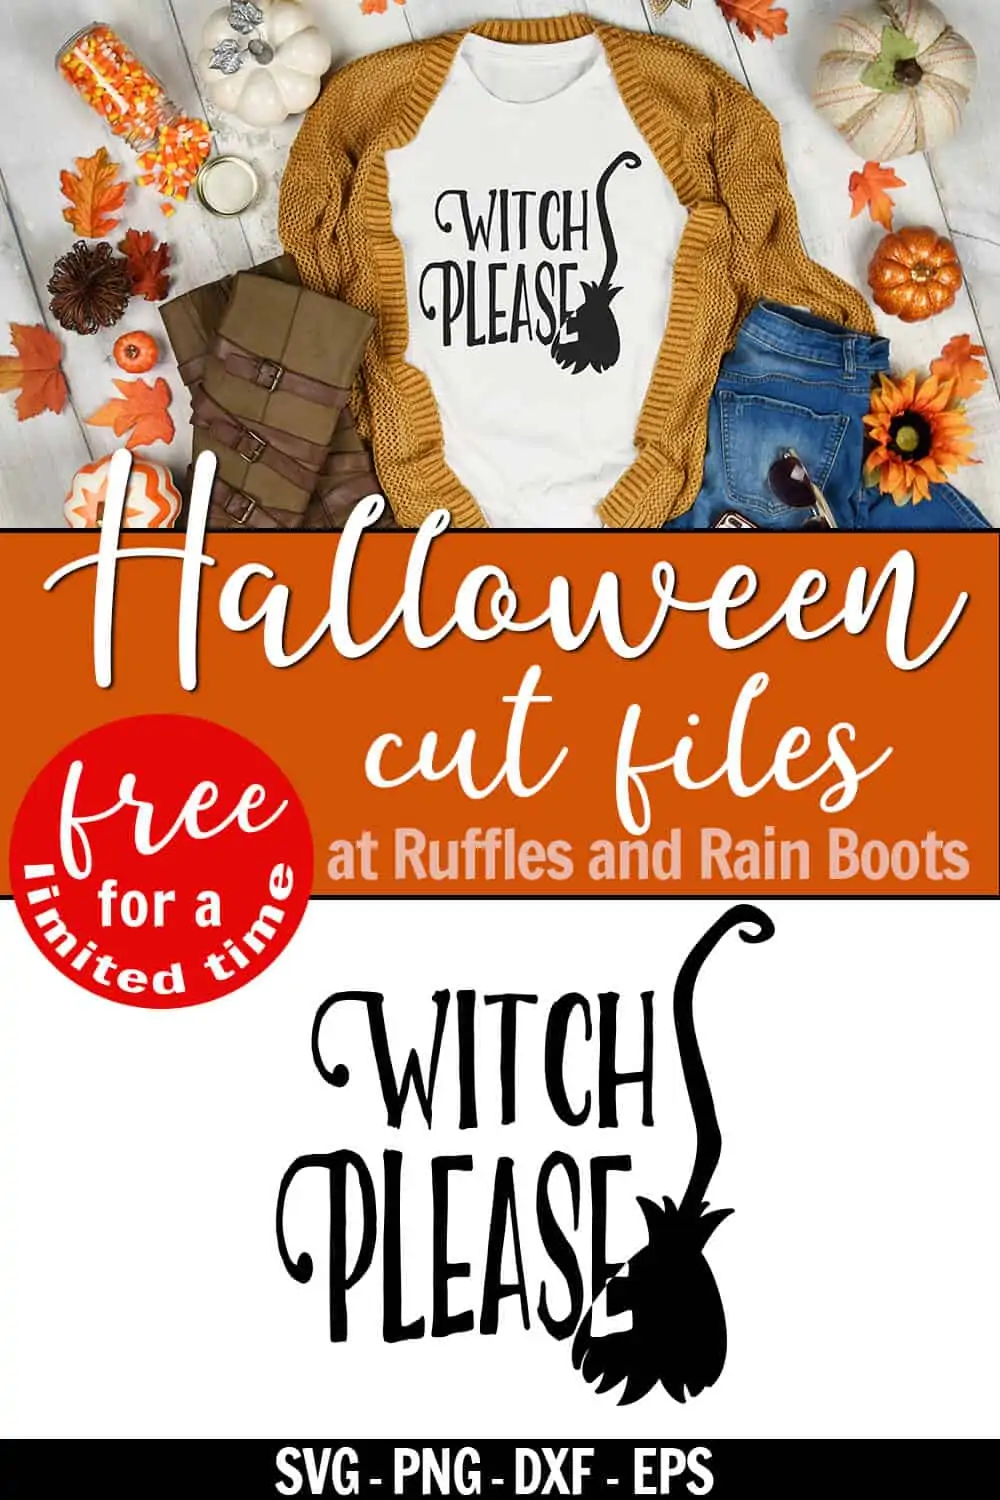 adorable Halloween Cricut project t-shirt made with free witch please svg with text which reads Halloween cut files at Ruffles and Rain Boots